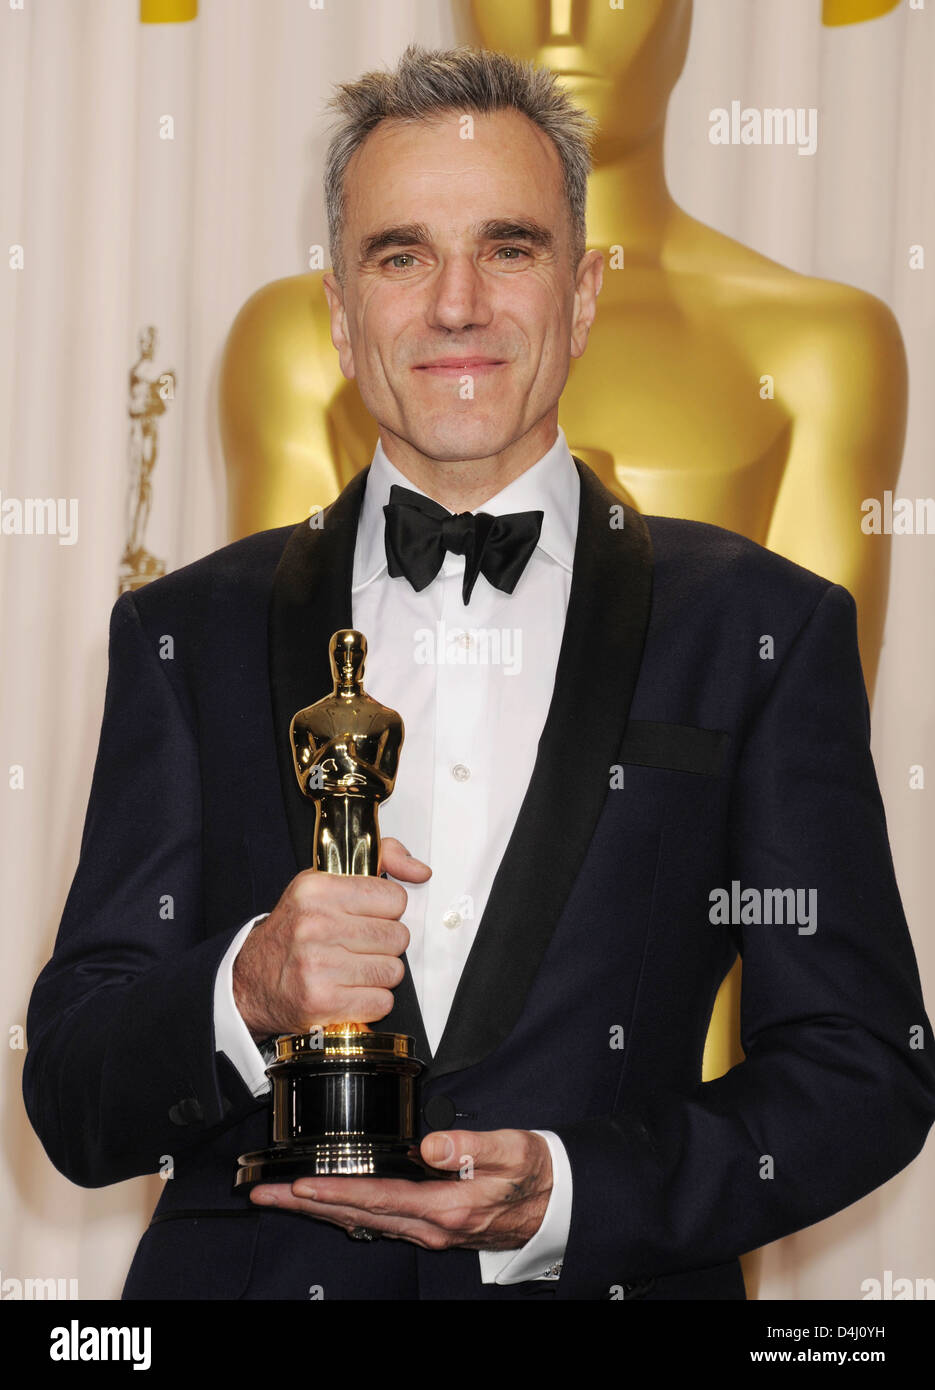 DANIEL DAY-LEWIS  Anglo-Irish film actor with his Oscar for LINCOLN awarded at the 85th Academy Awards in Los Angeles 2013 Stock Photo